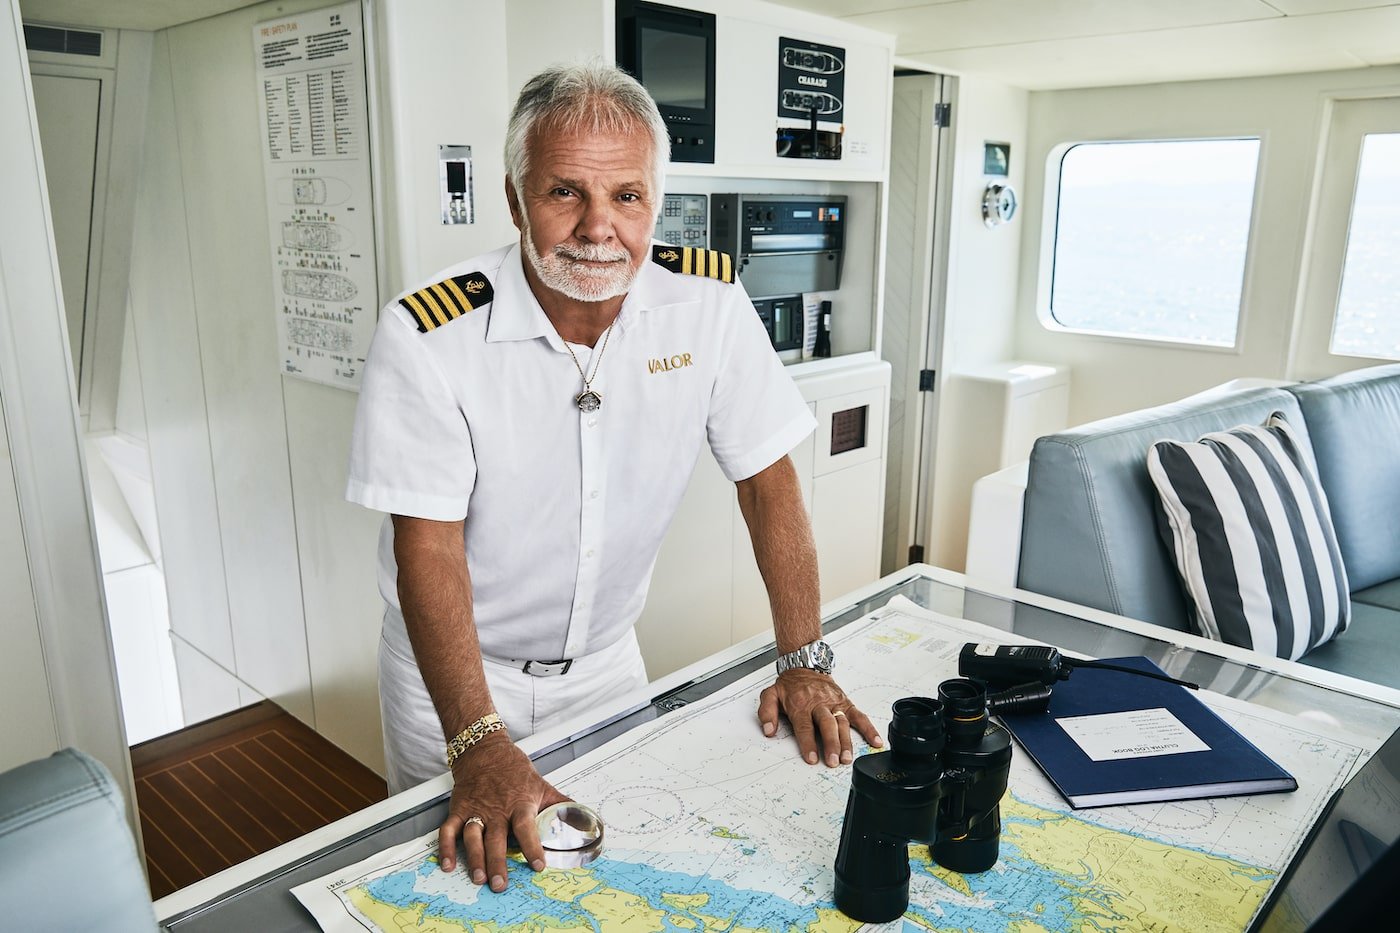 Captain Lee Rosbach from 'Below Deck' stands next to a map